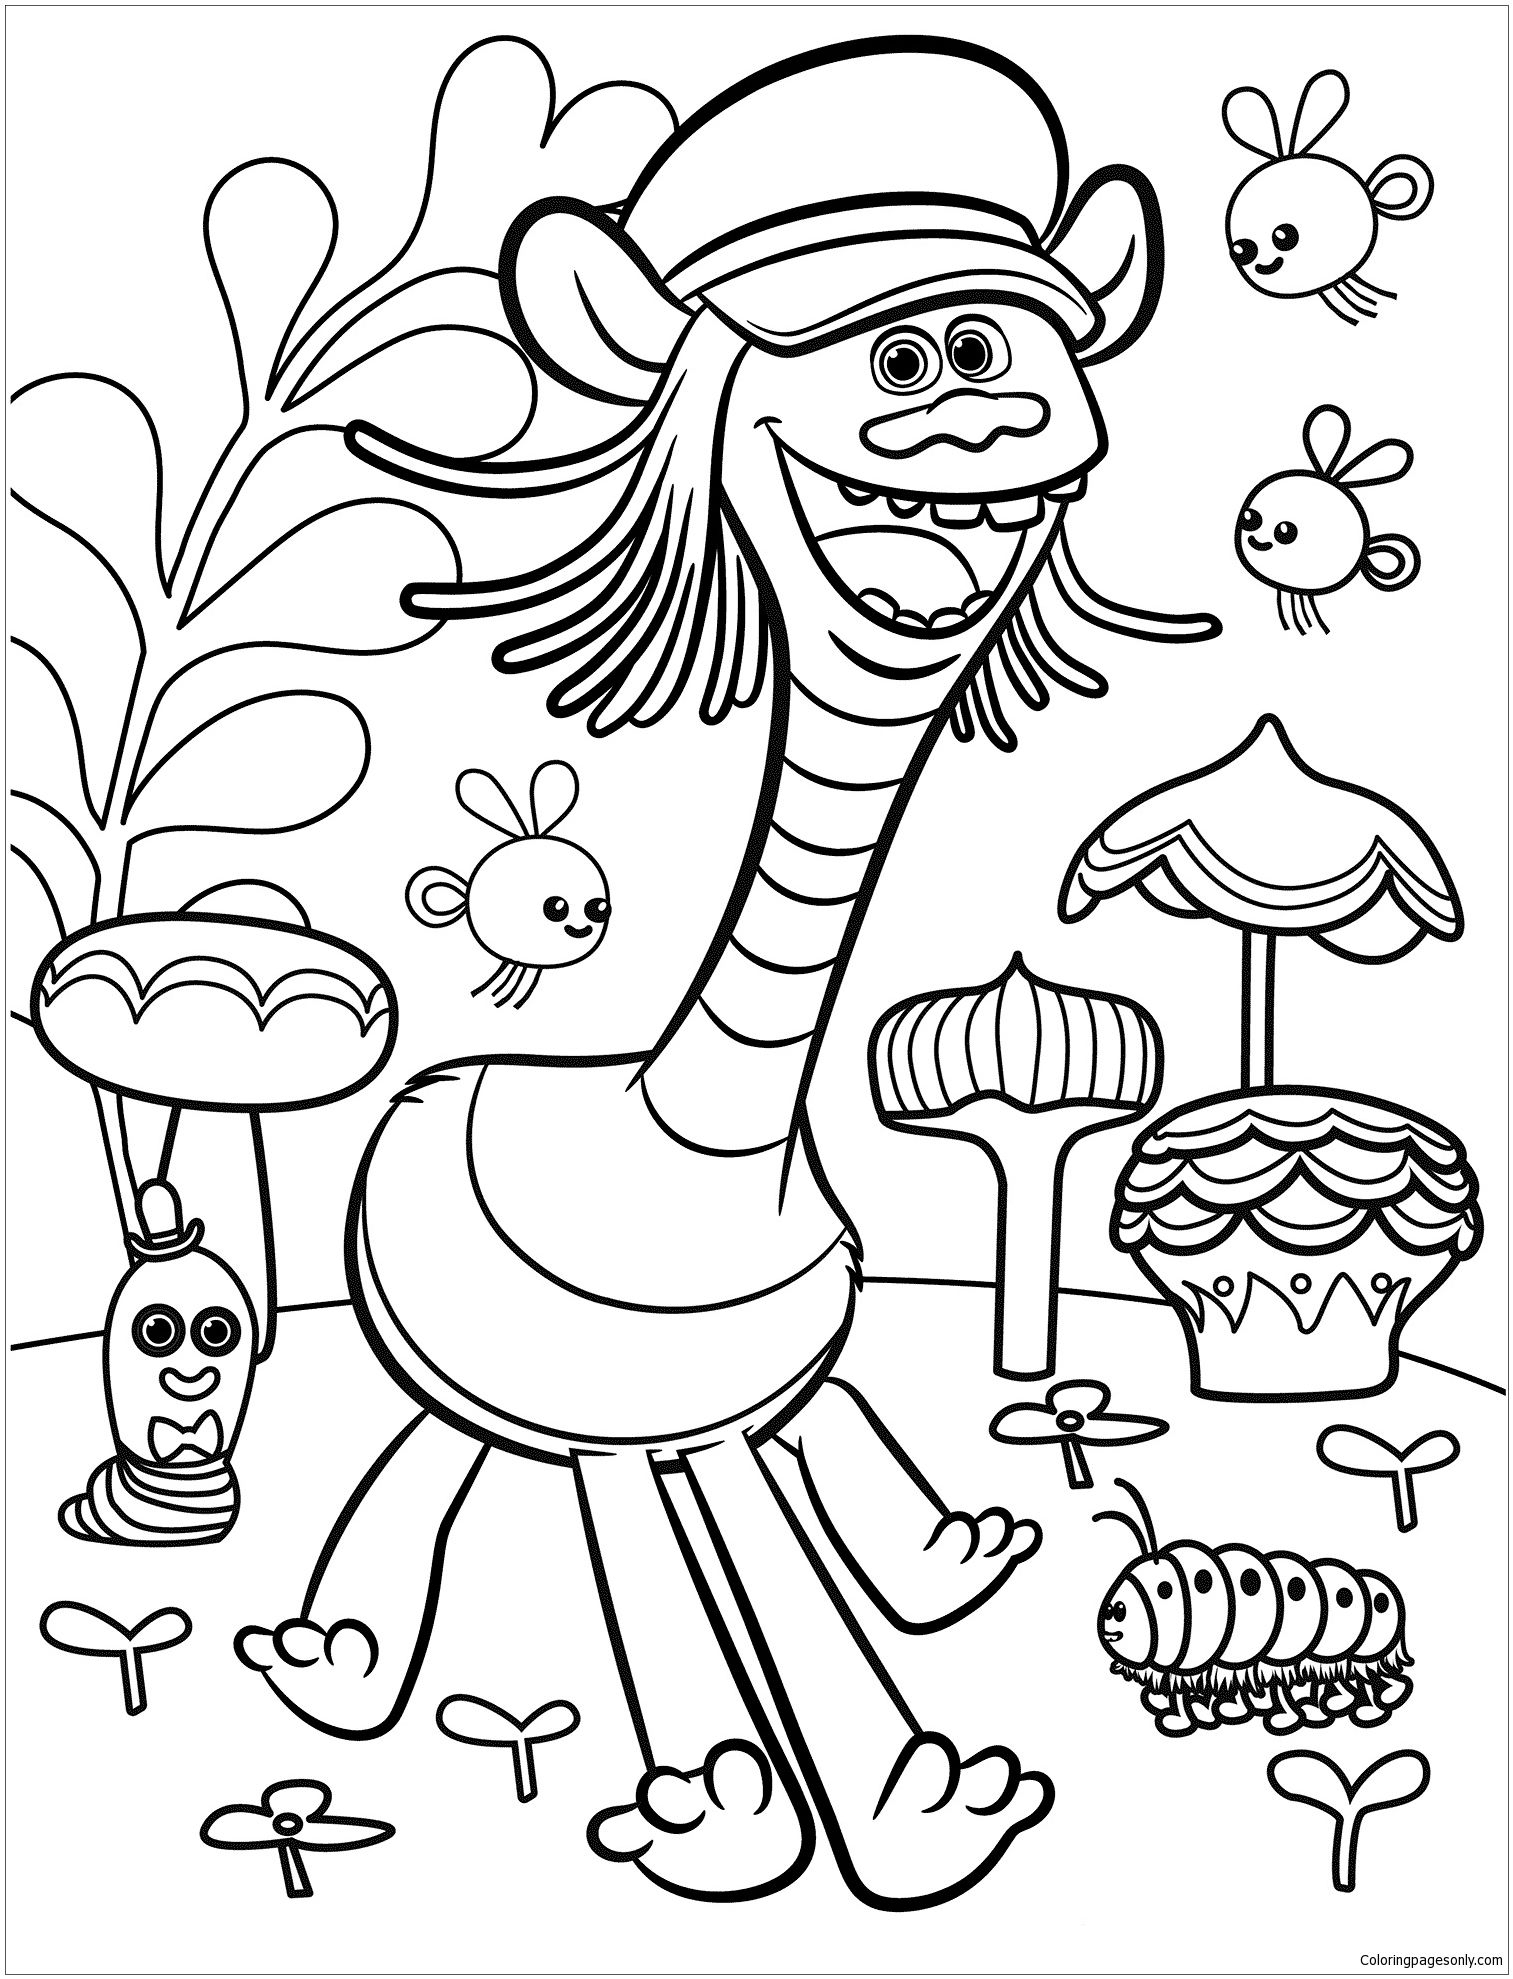 Trolls Movie 1 Coloring Page - Free Coloring Pages Online | Trolls - Free Printable Troll Coloring Pages